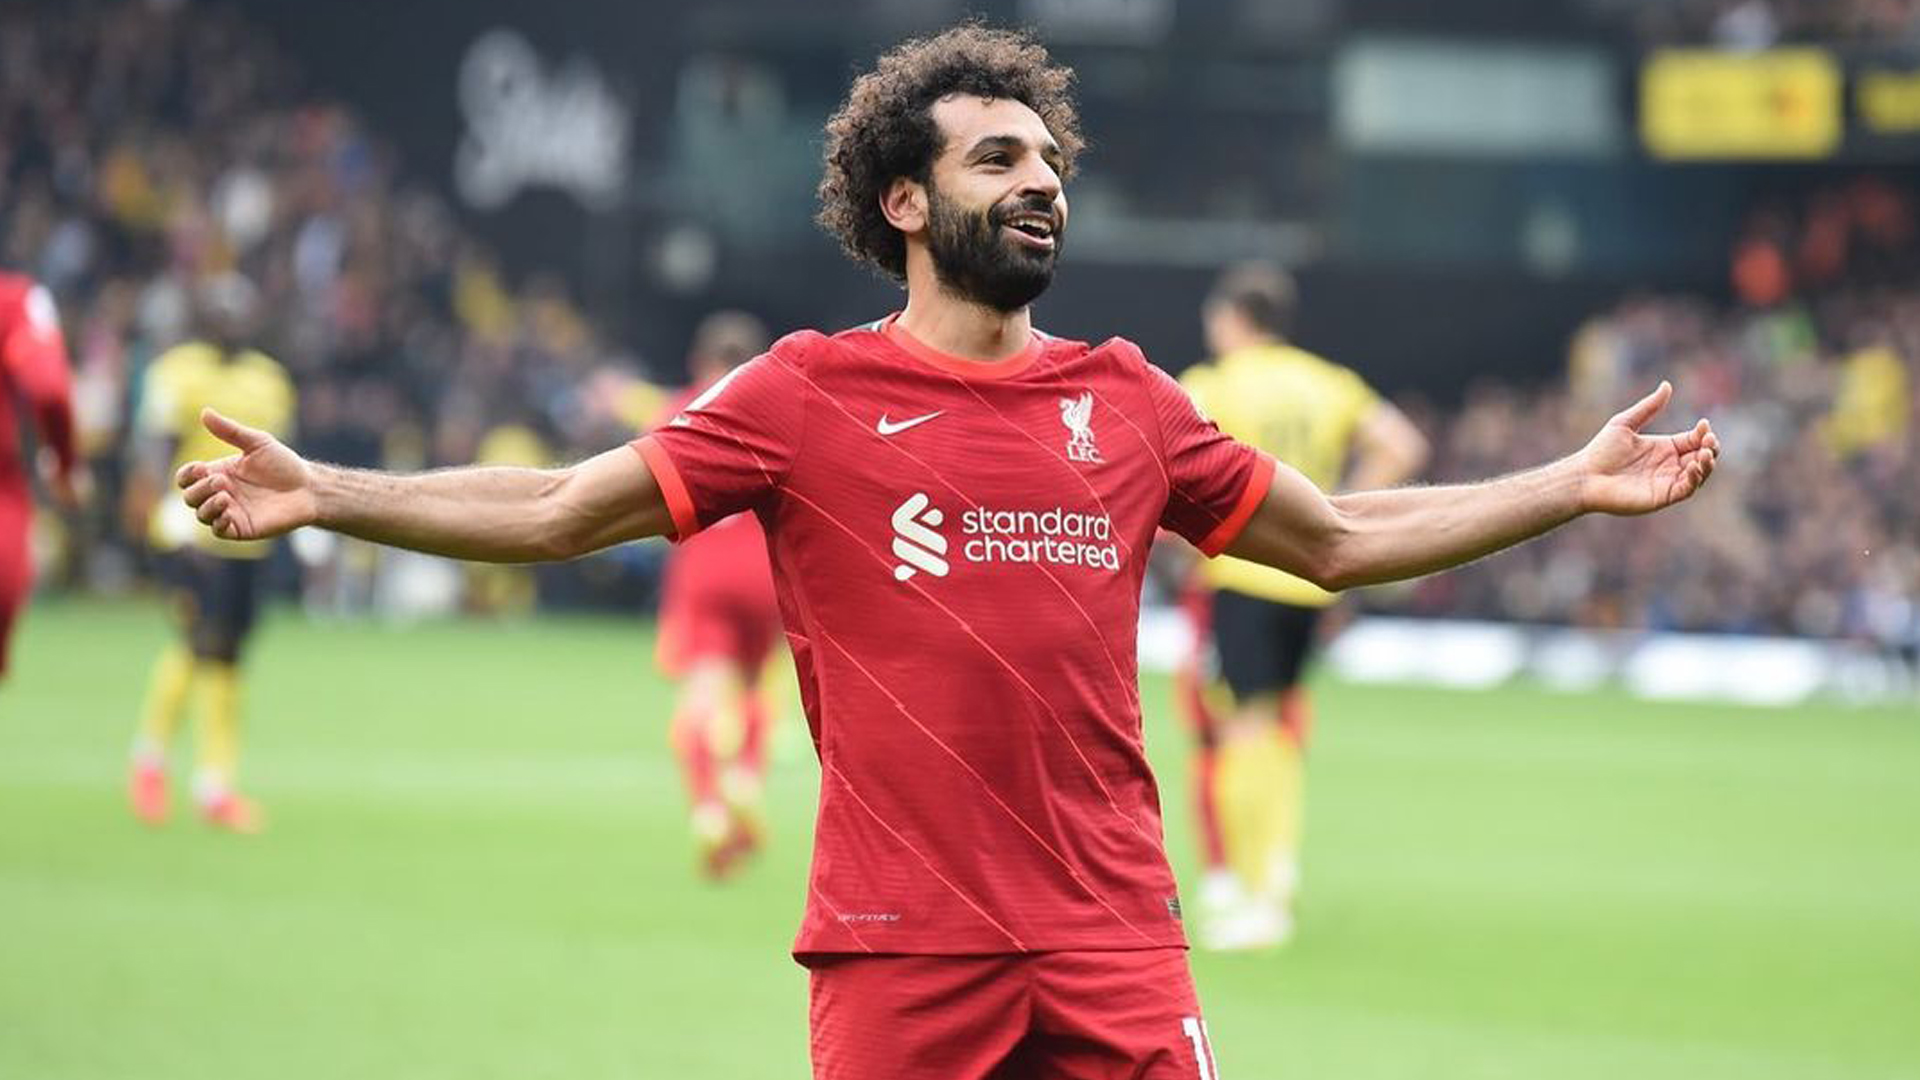 Klopp makes abrupt statement about renewal of Mo Salah’s contract